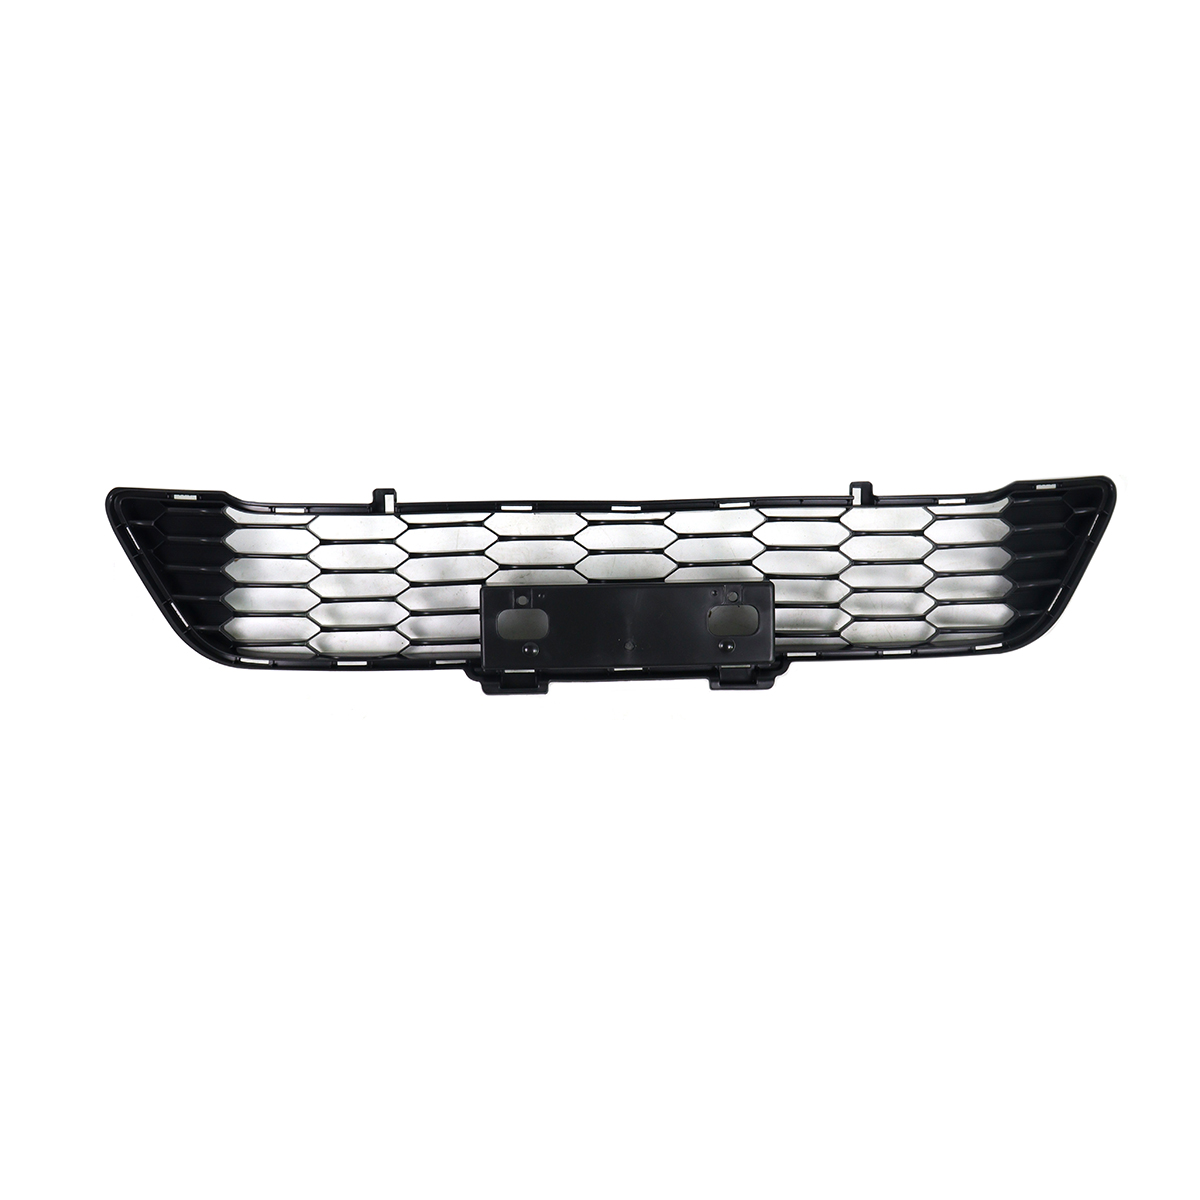 Geling High-Perform Air Intake Technology Car Front Bumper Grille for Toyota Revo 2016-2018 Update to Rocco 2020